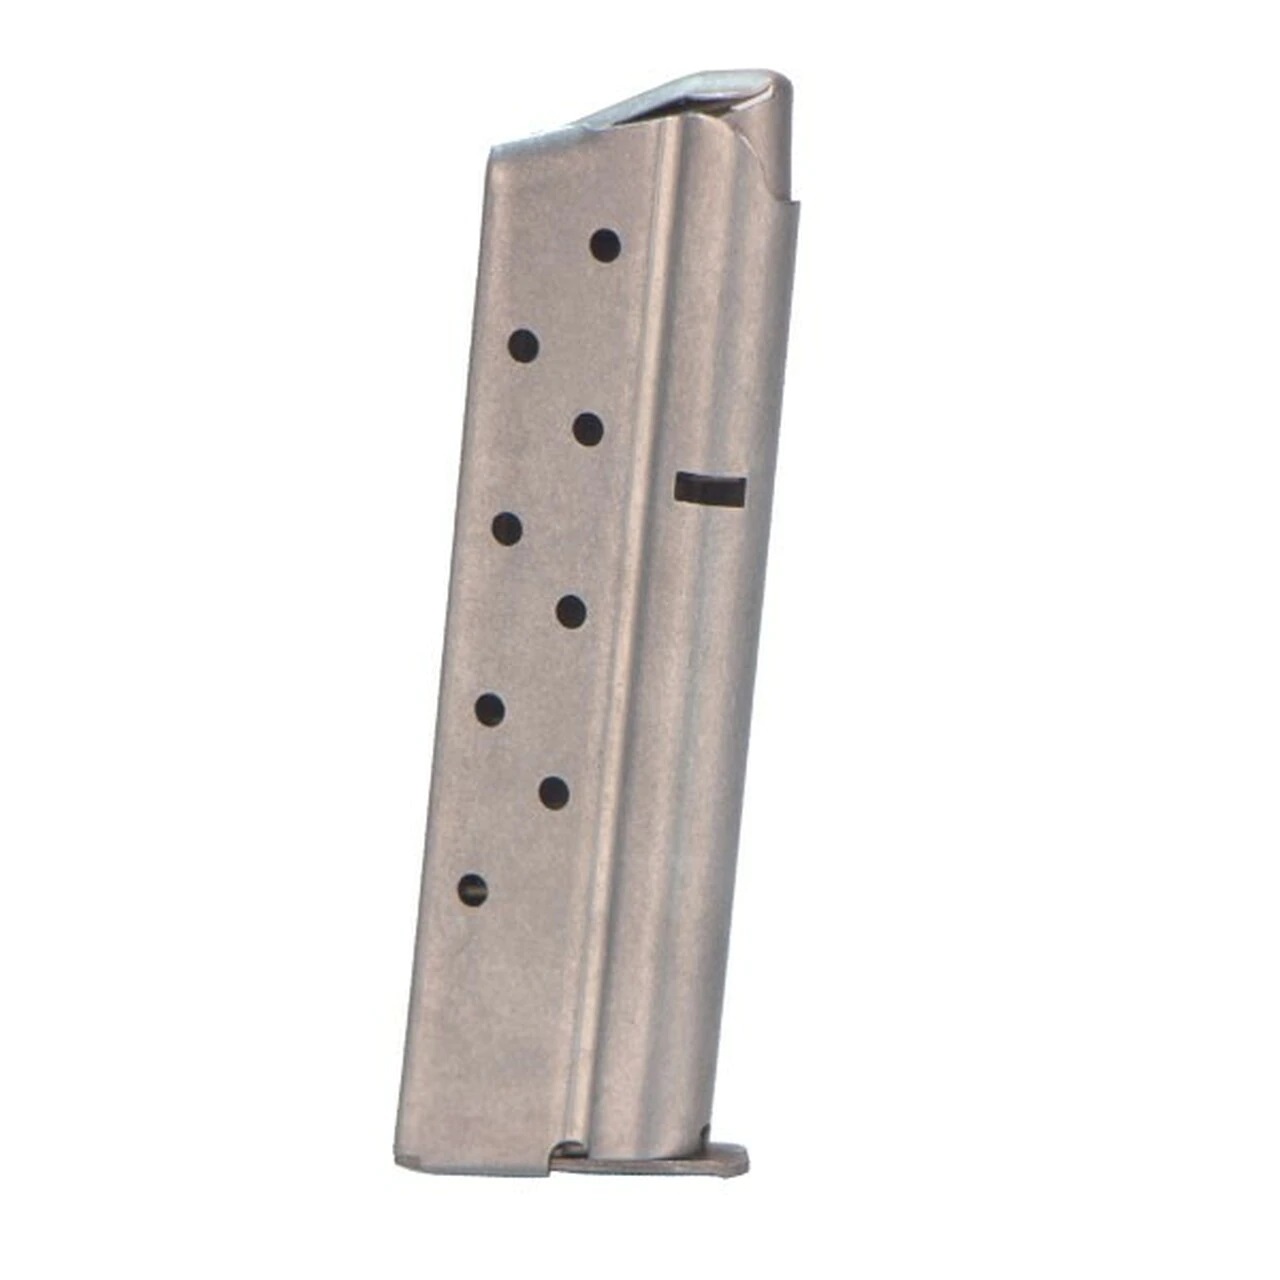 METALFORM 1911 GOVERNMENT OR COMMANDER 10mm 8 ROUND STAINLESS STEEL MAGAZINE 10.797